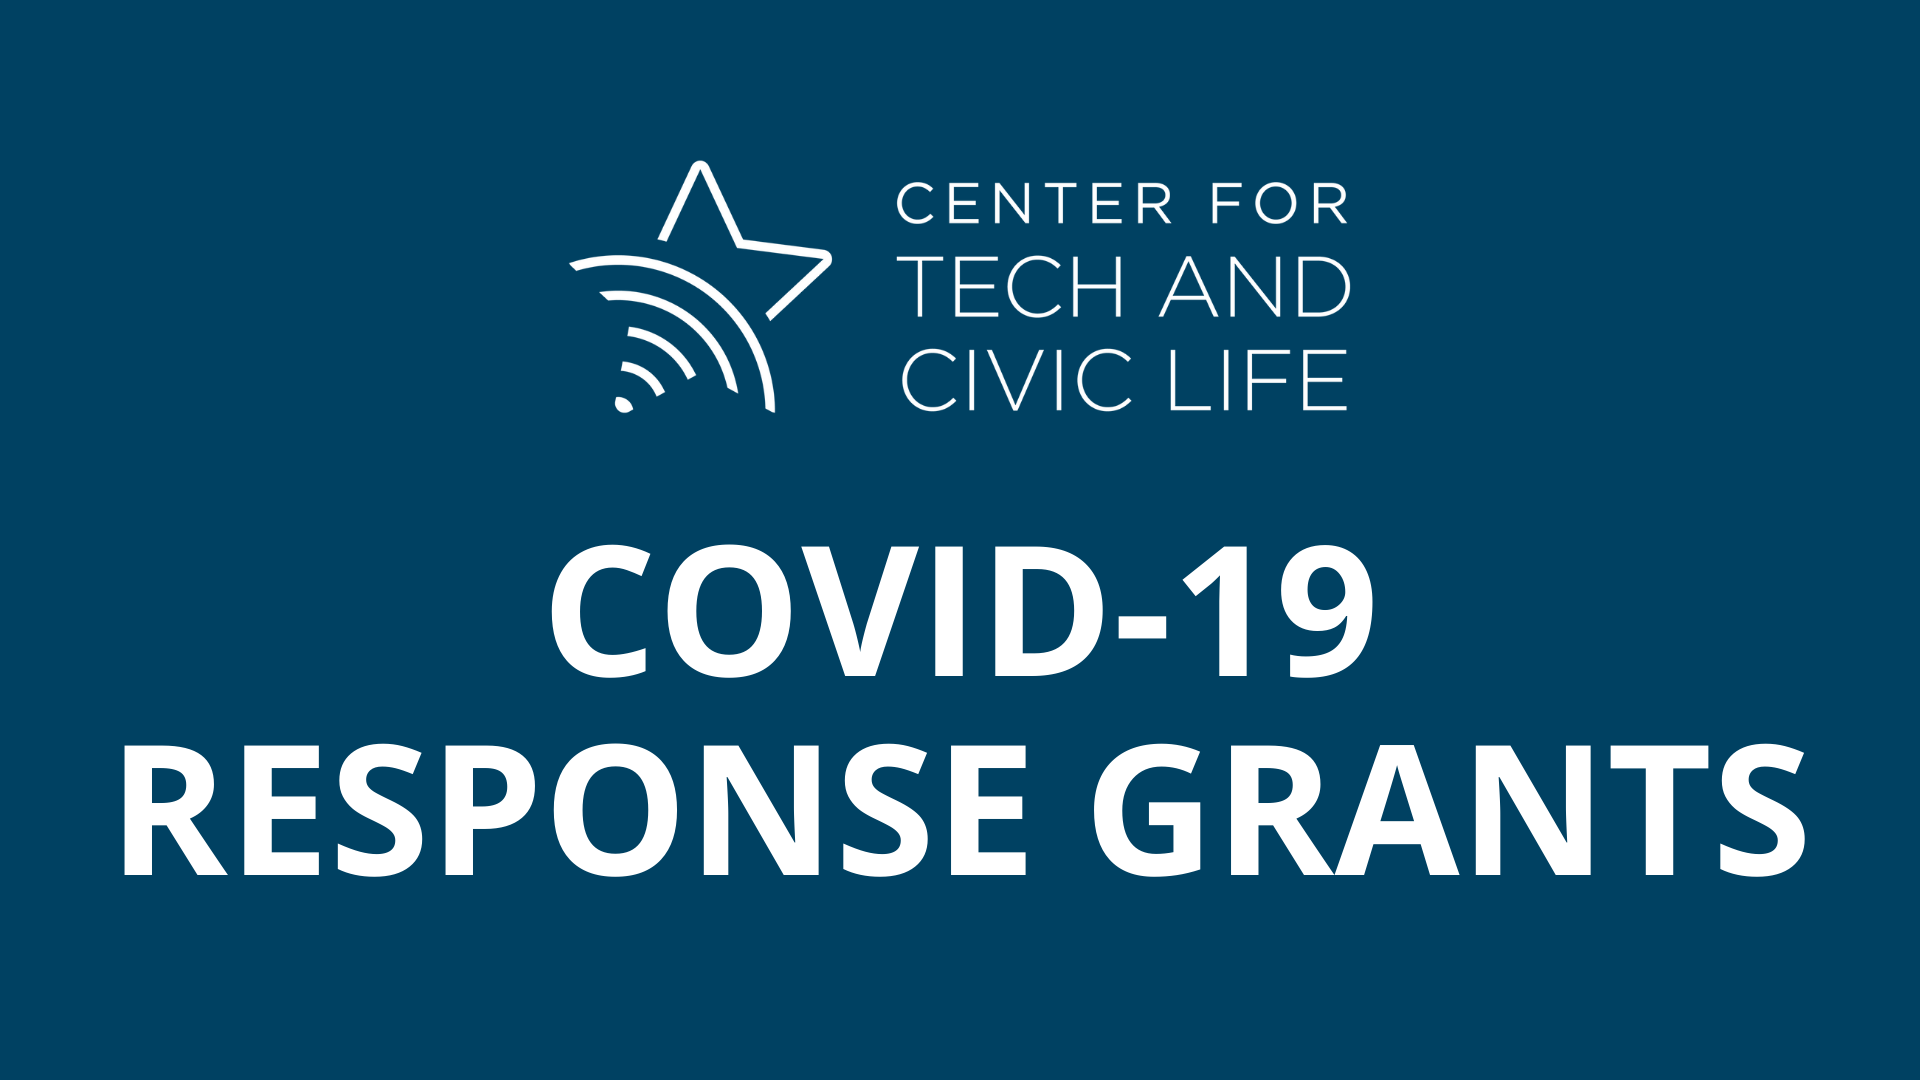 Covid-19 Response Grants - Center For Tech And Civic Life